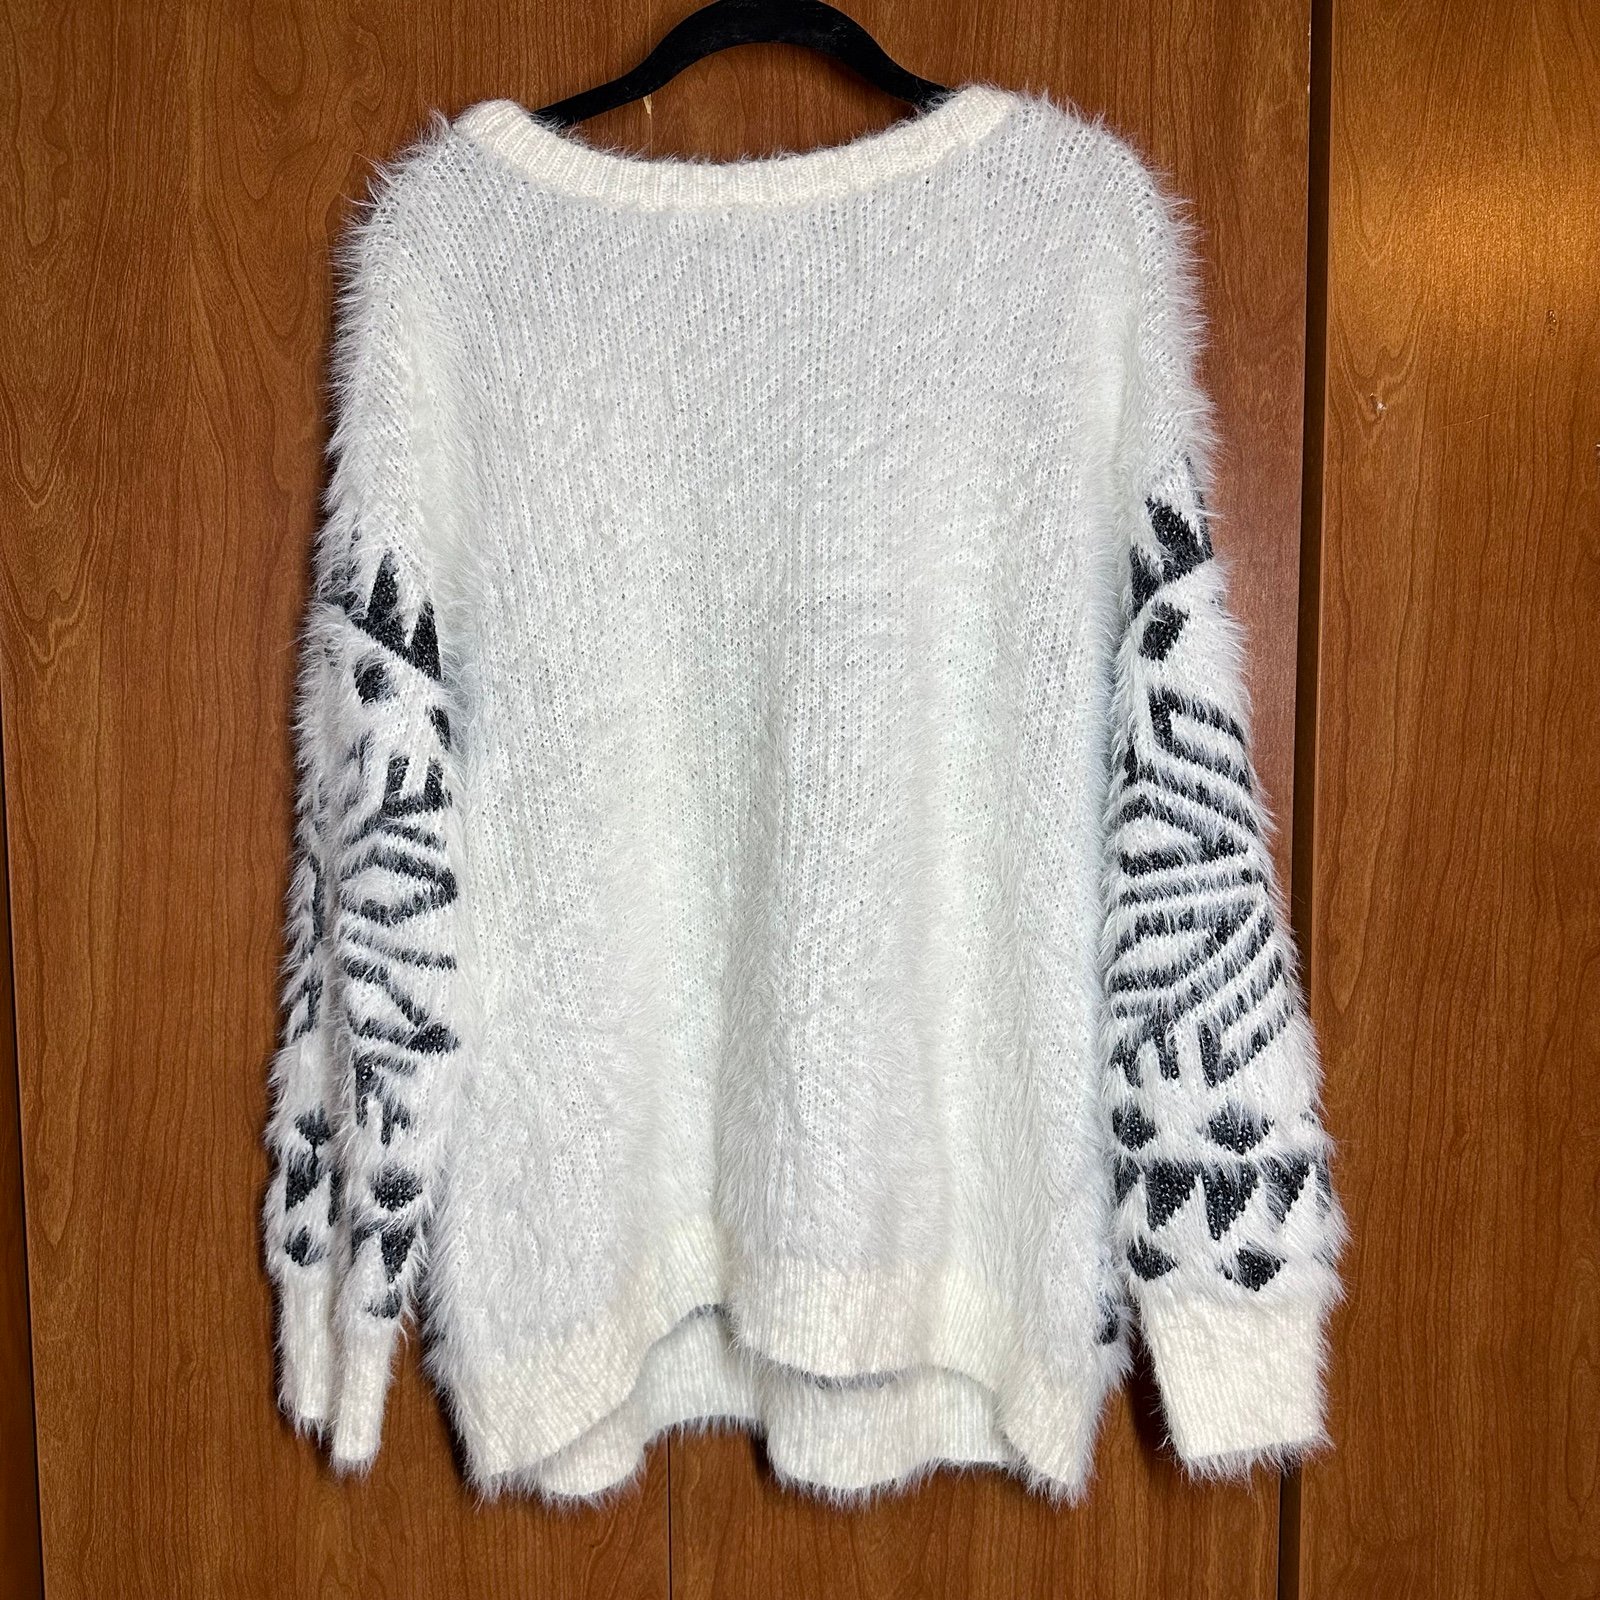 Great Maurices Patterned Fuzzy Sweater Knit Aztec Snowflake Print Pullover Size XL jNigoocY9 well sale